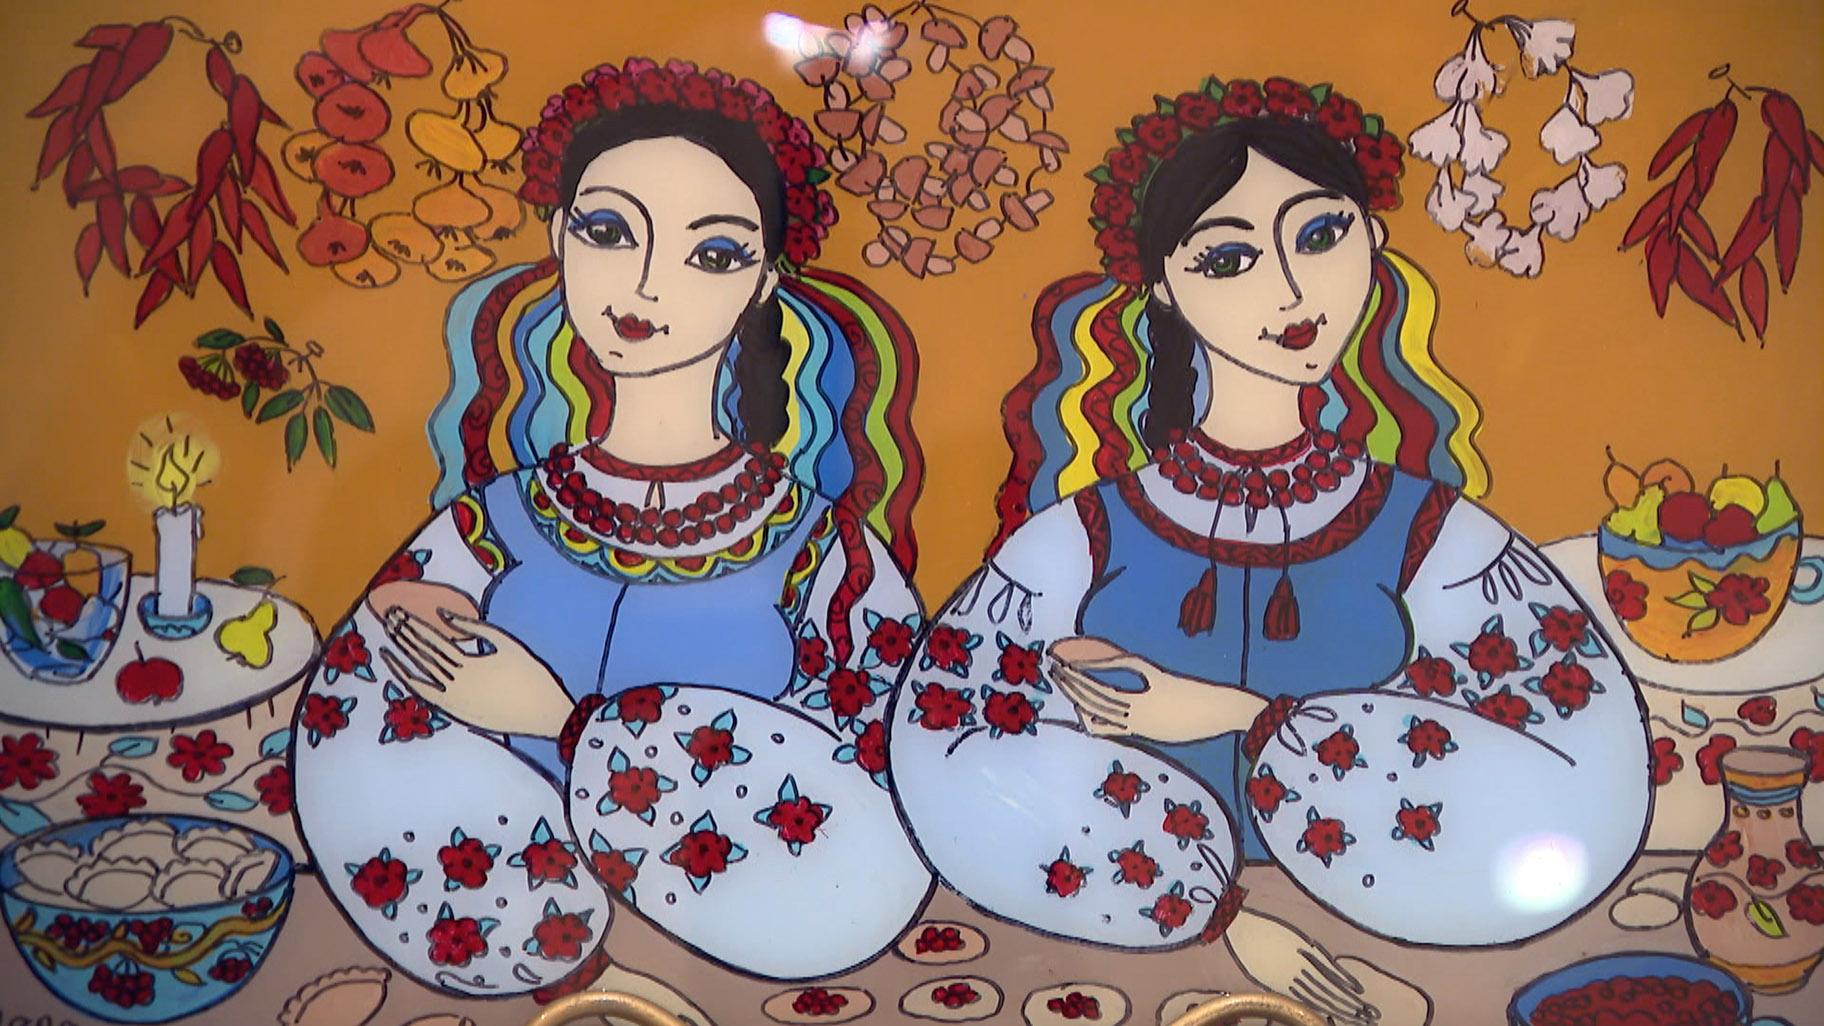 Many images are painted directly onto glass. It’s a customary form of Ukrainian folk painting that celebrates cultural heritage – and religious icons. (WTTW News)